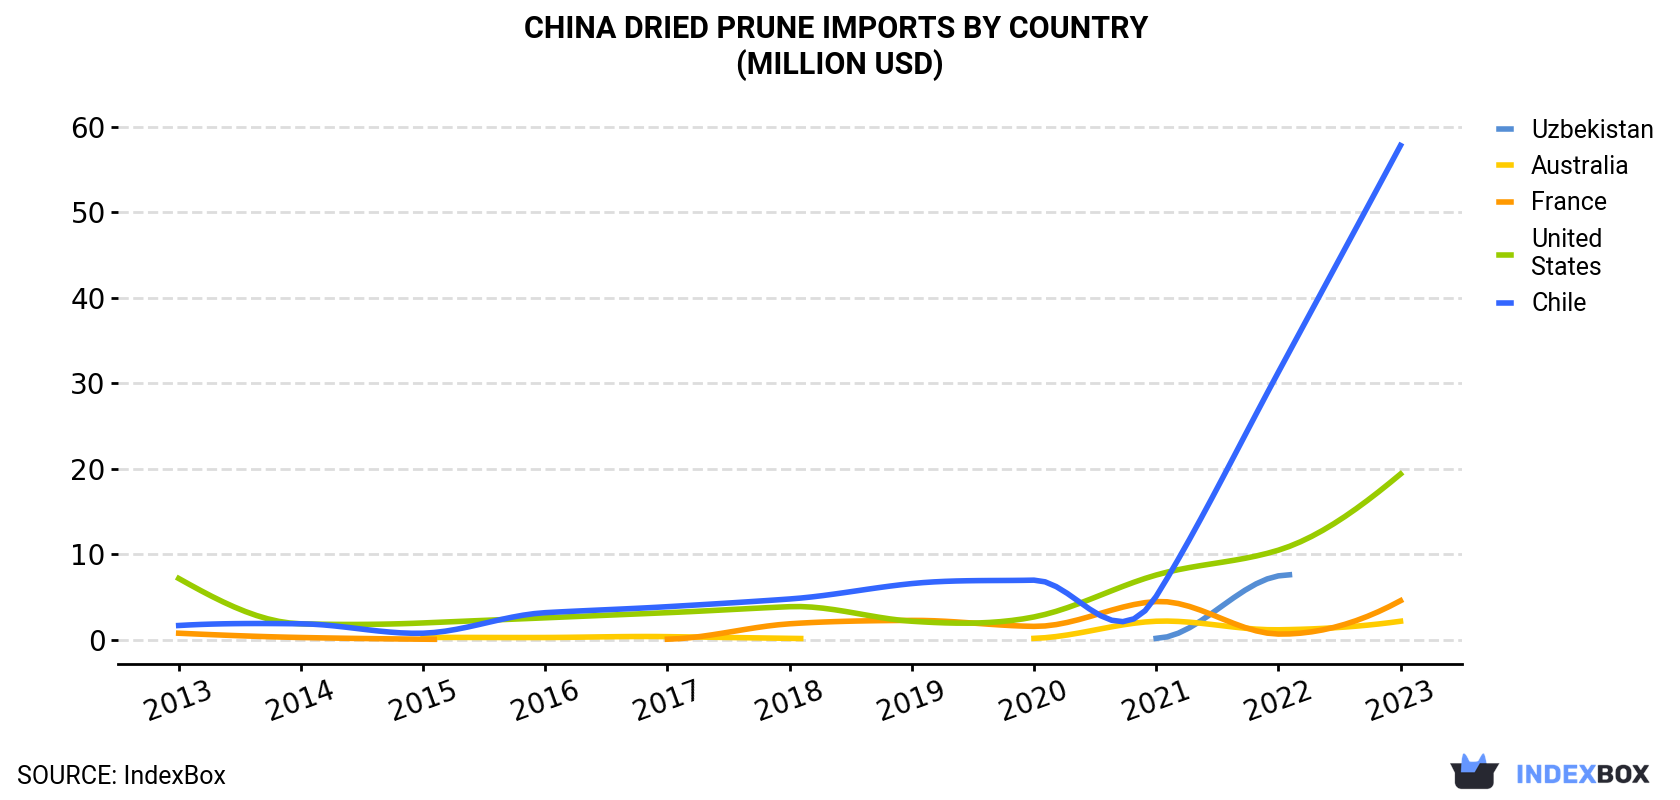 China Dried Prune Imports By Country (Million USD)